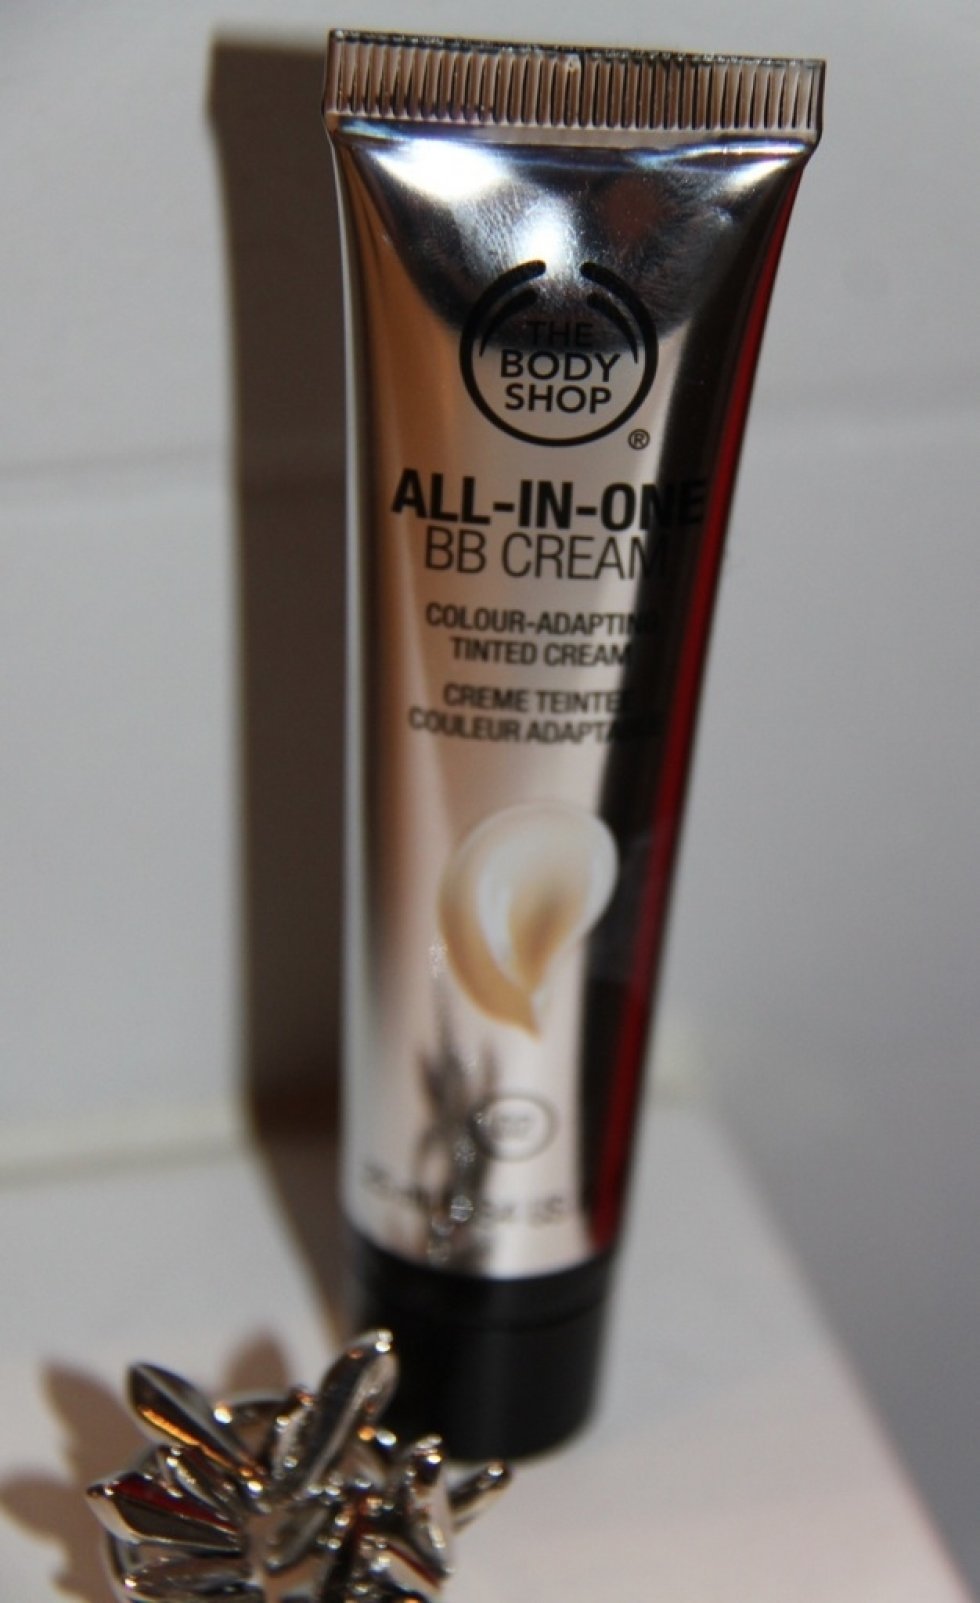 All in one BB Cream fra The Body Shop